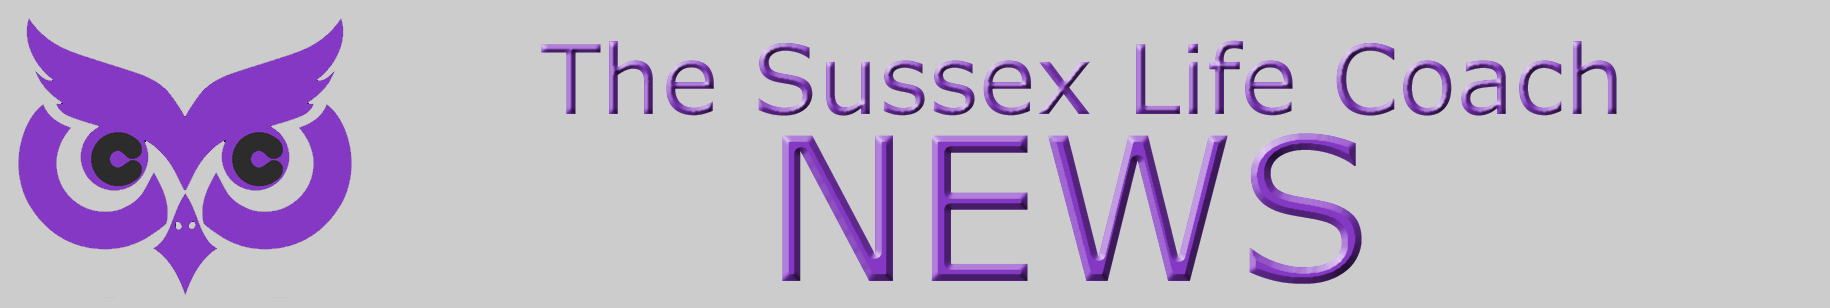 The Sussex Life Coach